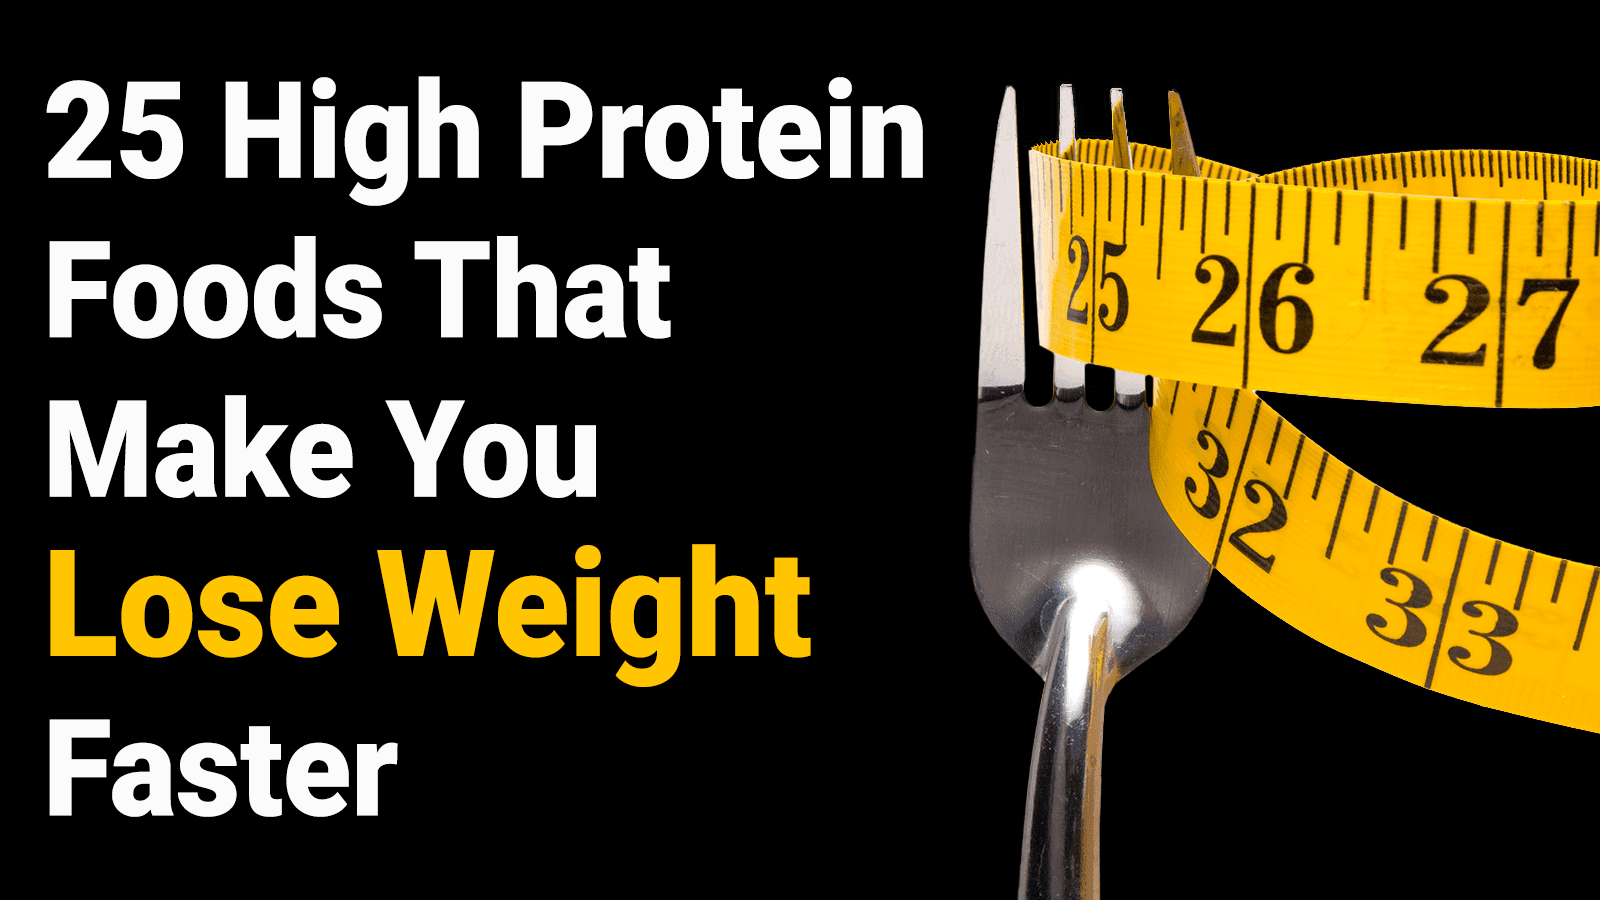 25 High Protein Foods That Make You Lose Weight Faster